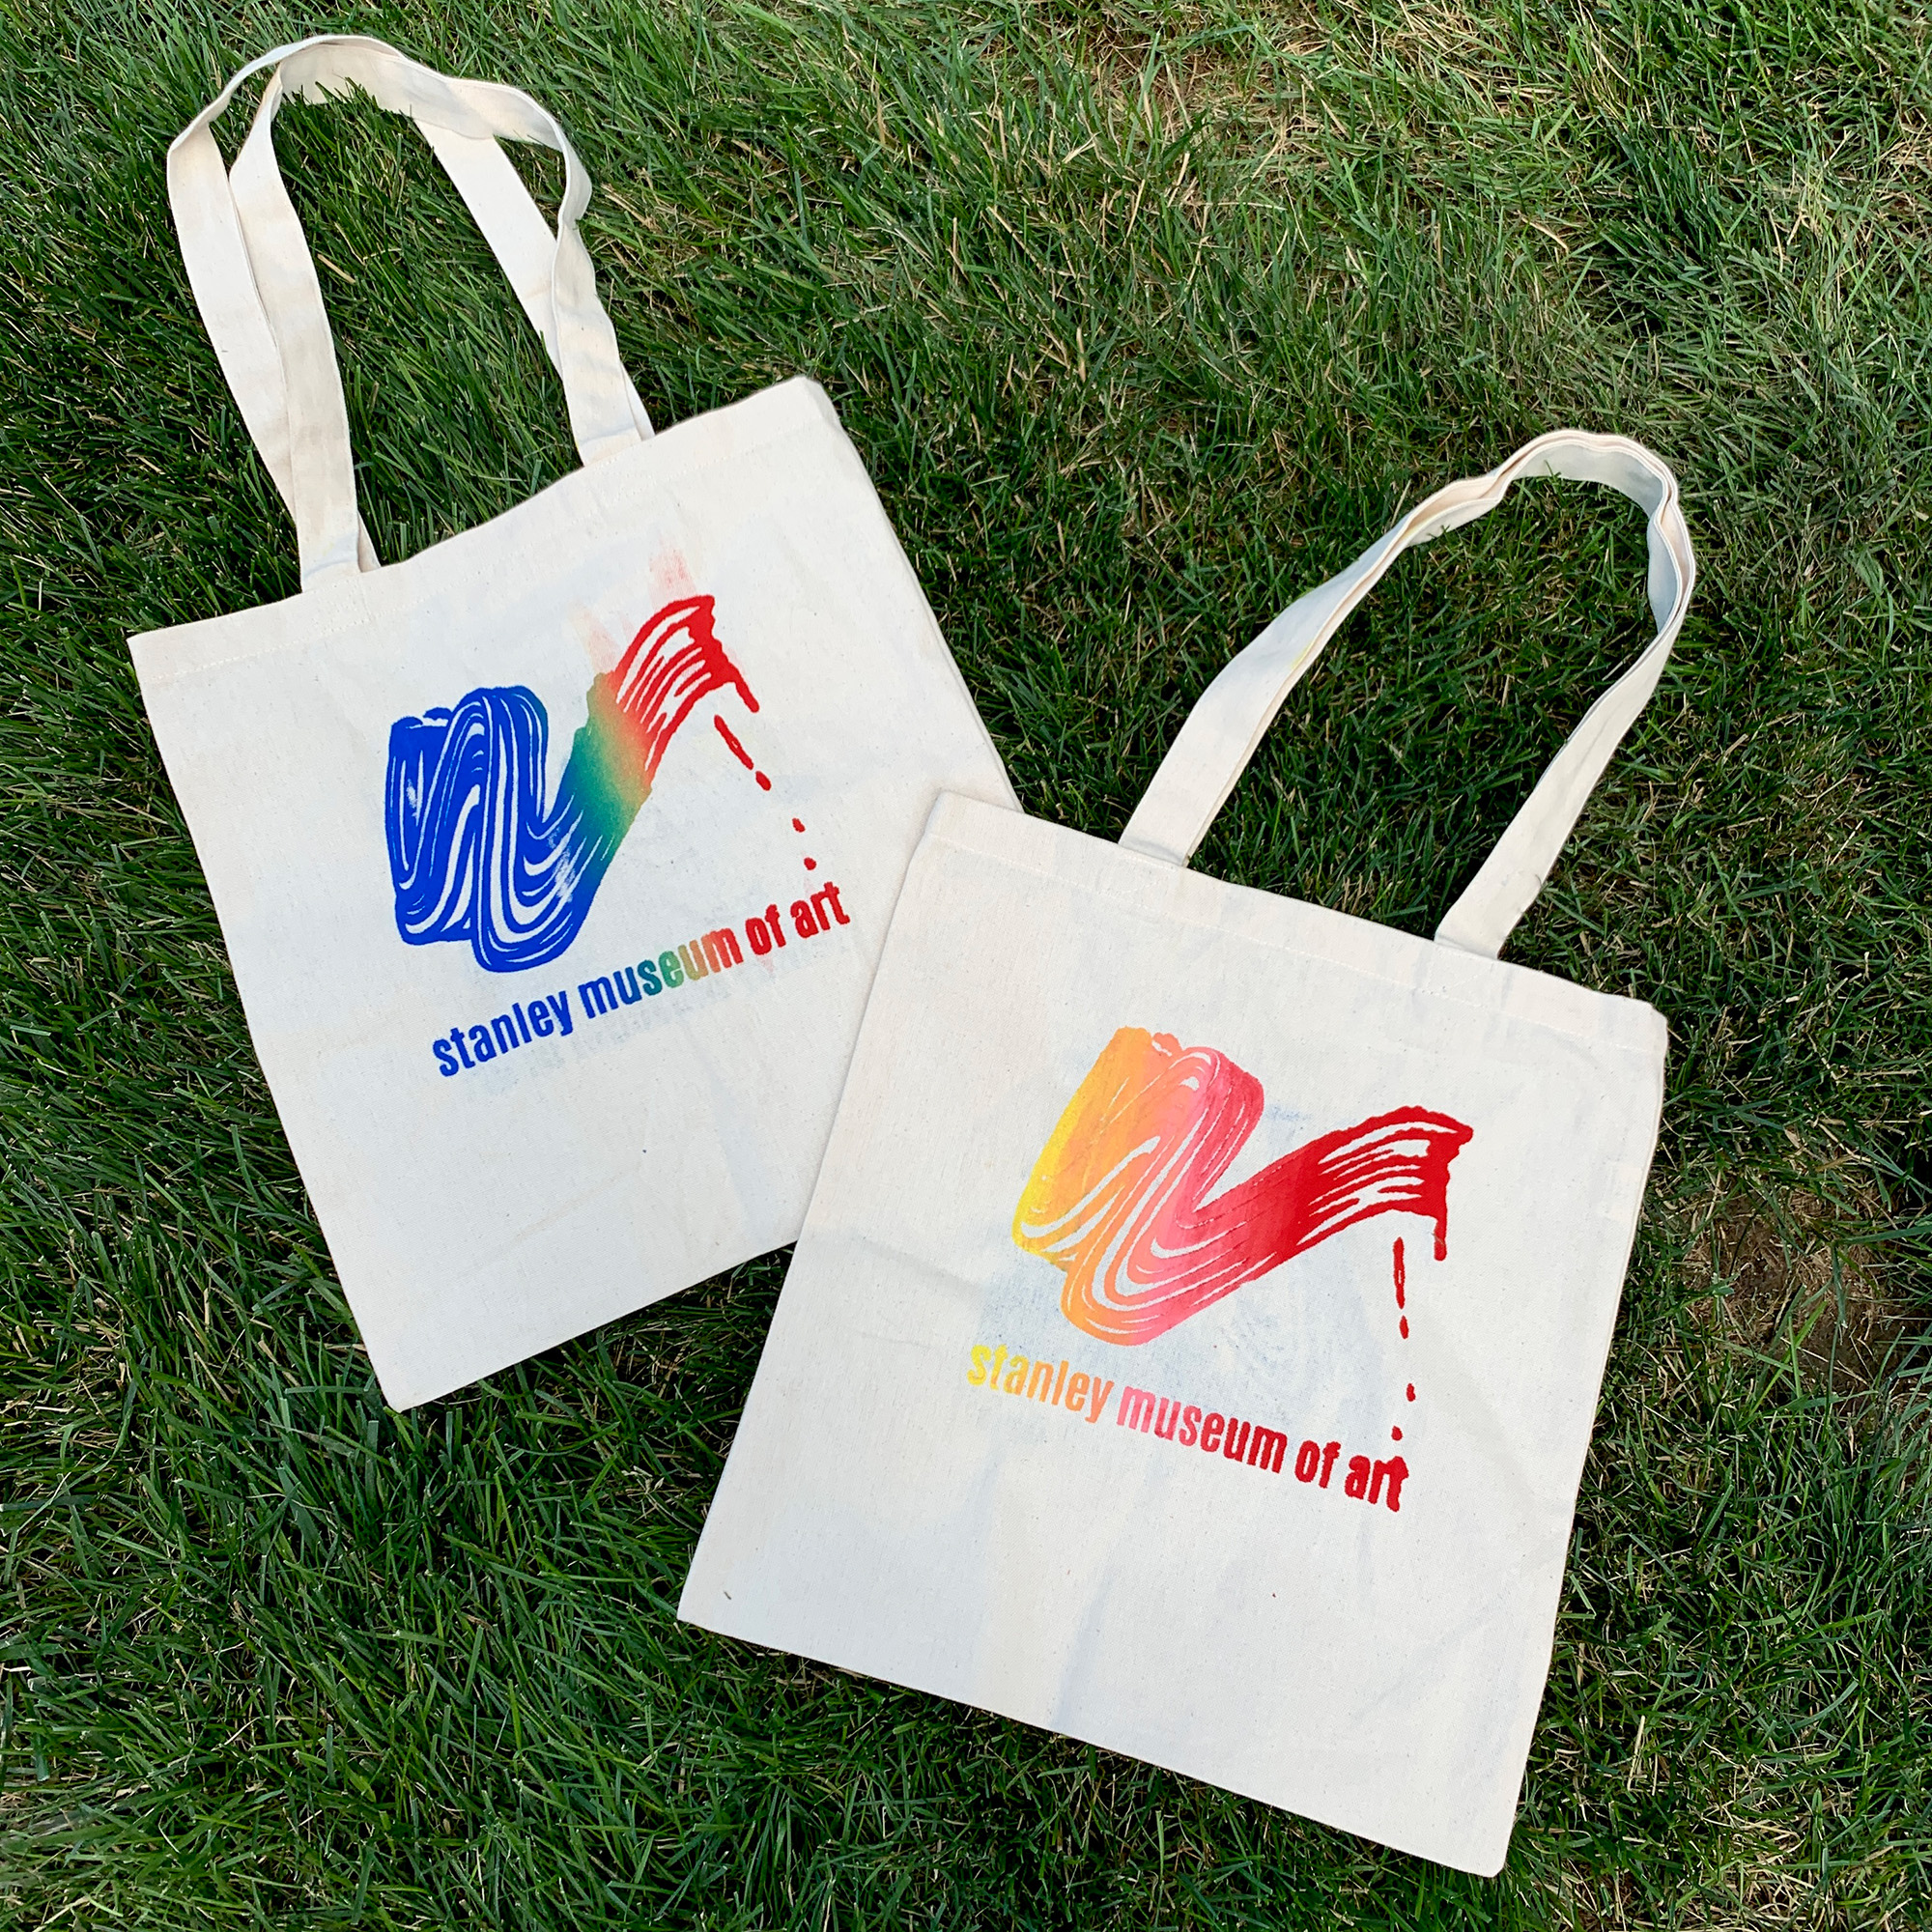 Two hand-printed canvas tote bags lay in the grass. Each has been screenprinted with an abstracted image of a brushstroke and the words "Stanley Museum of Art" in a rainbow of colors.